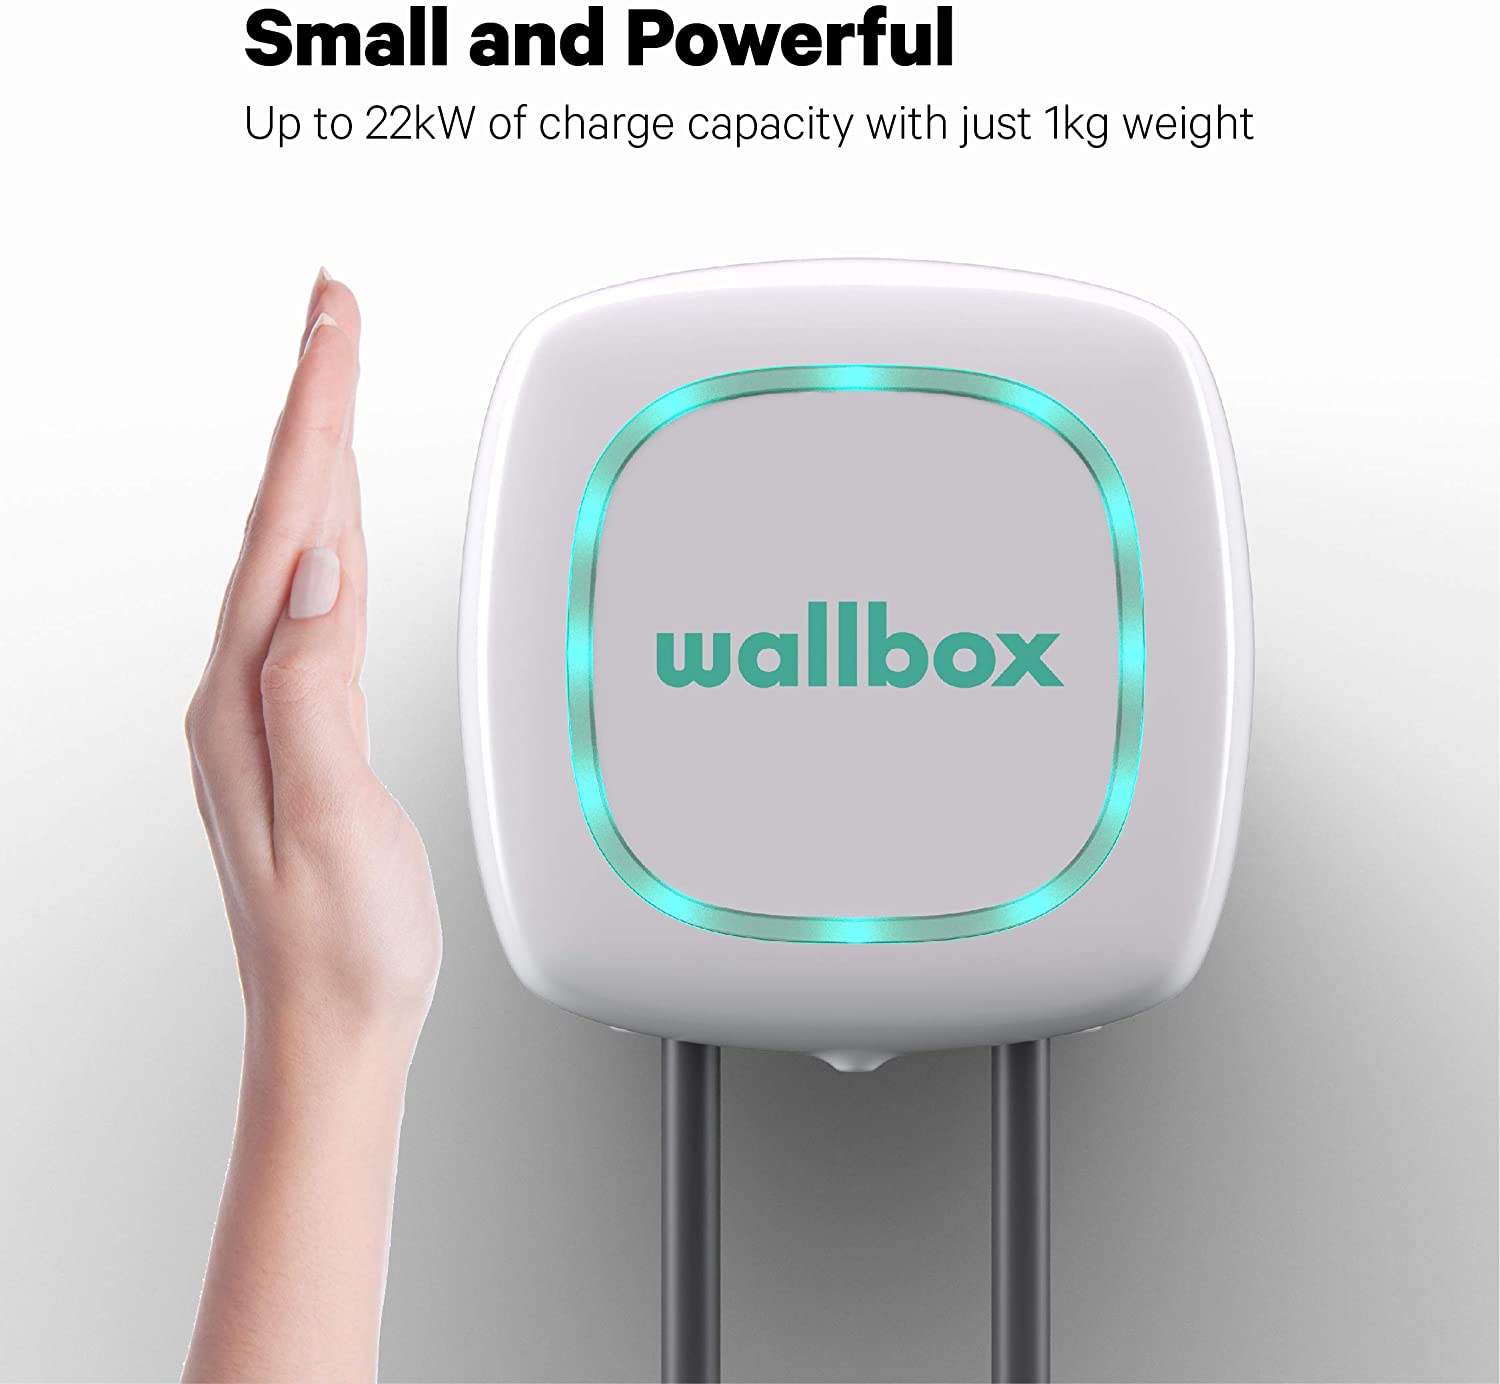 Wallbox Pulsar Plus - What You Need to Know - EV Charger Series 